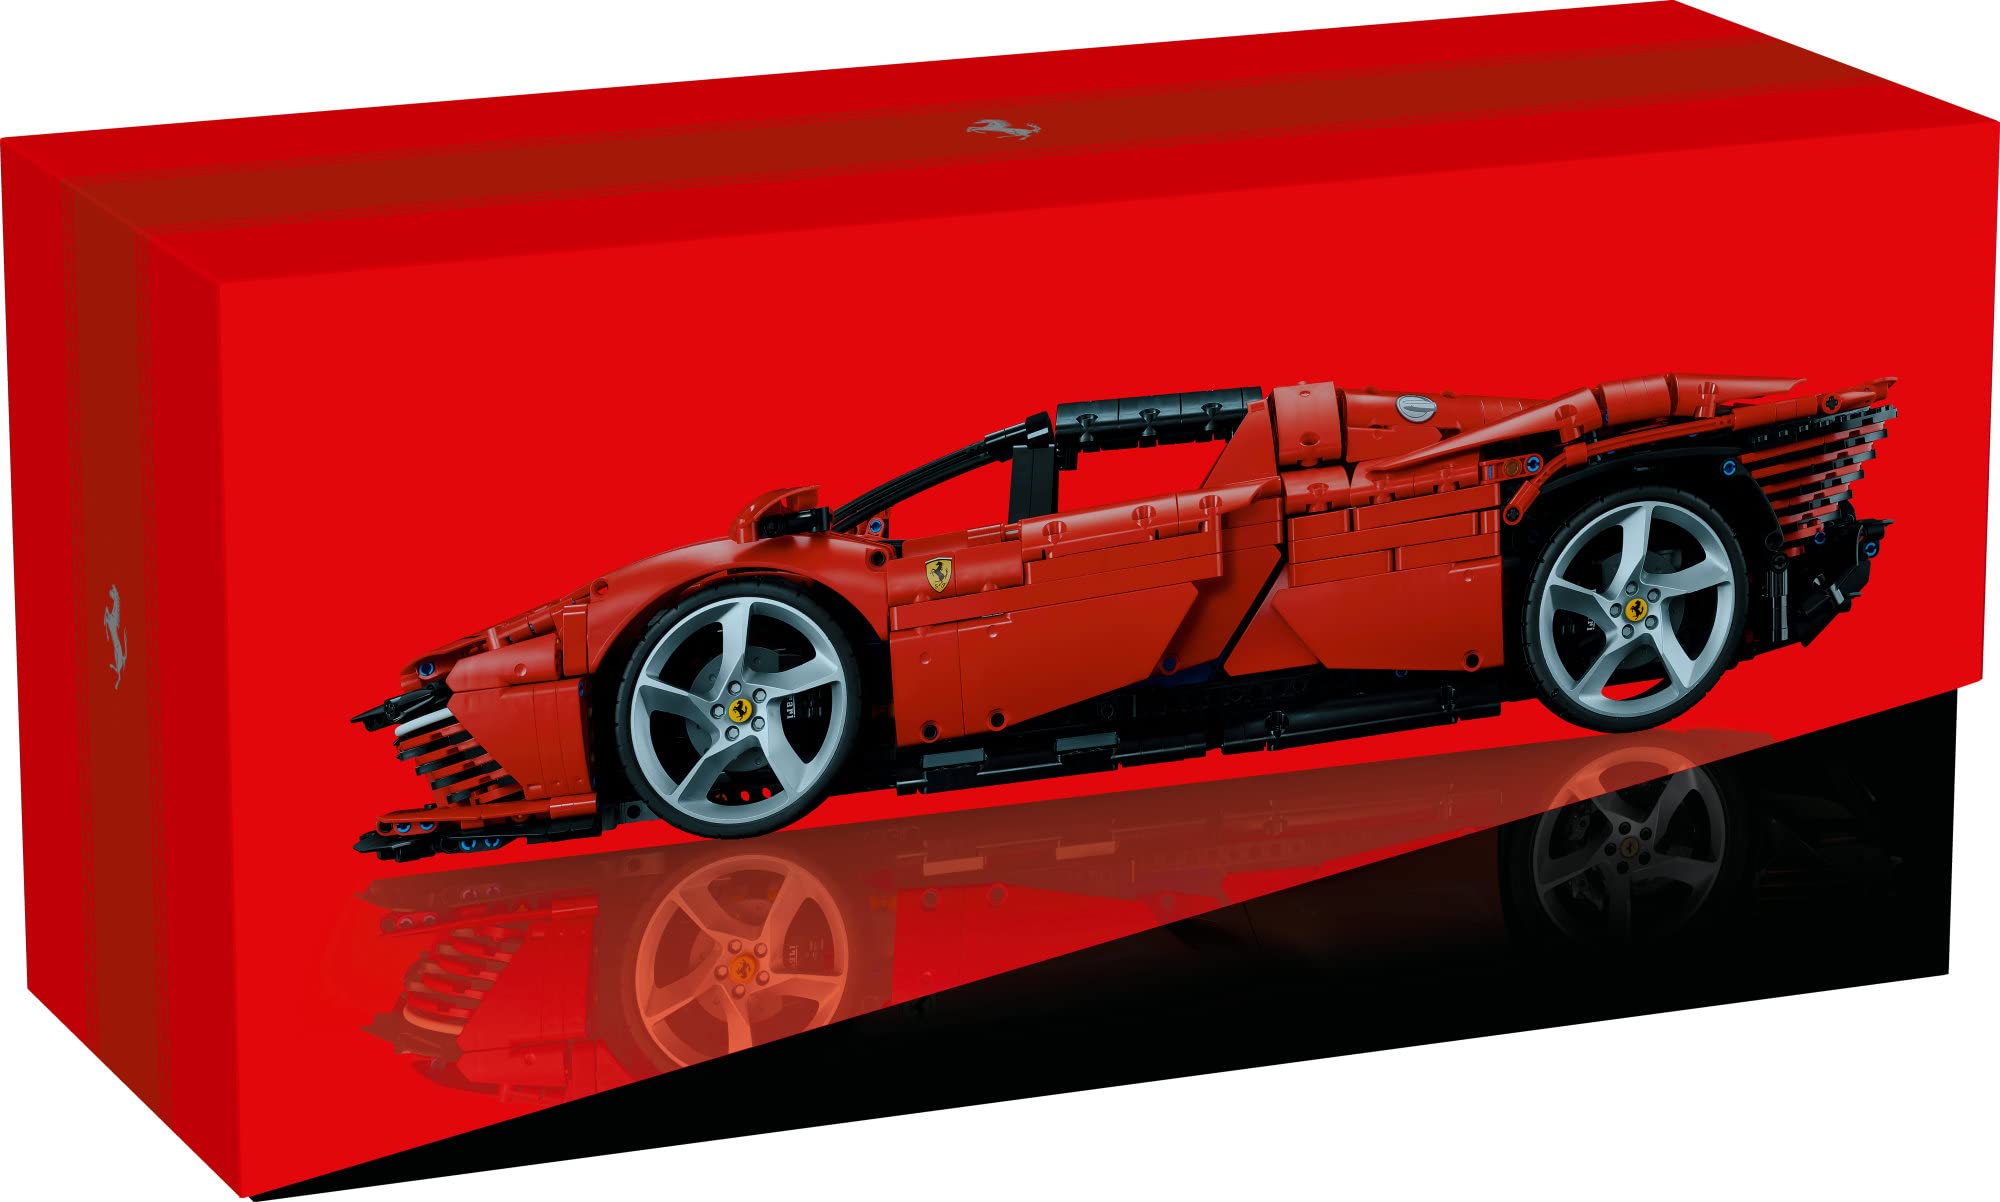 LEGO Technic Ferrari Daytona SP3 42143, Race Car Model Building Kit, 1:8 Scale Advanced Collectible Set for Adults, Ultimate Cars Concept Series, Great Gift for Car Lover for Anniversary or Birthday